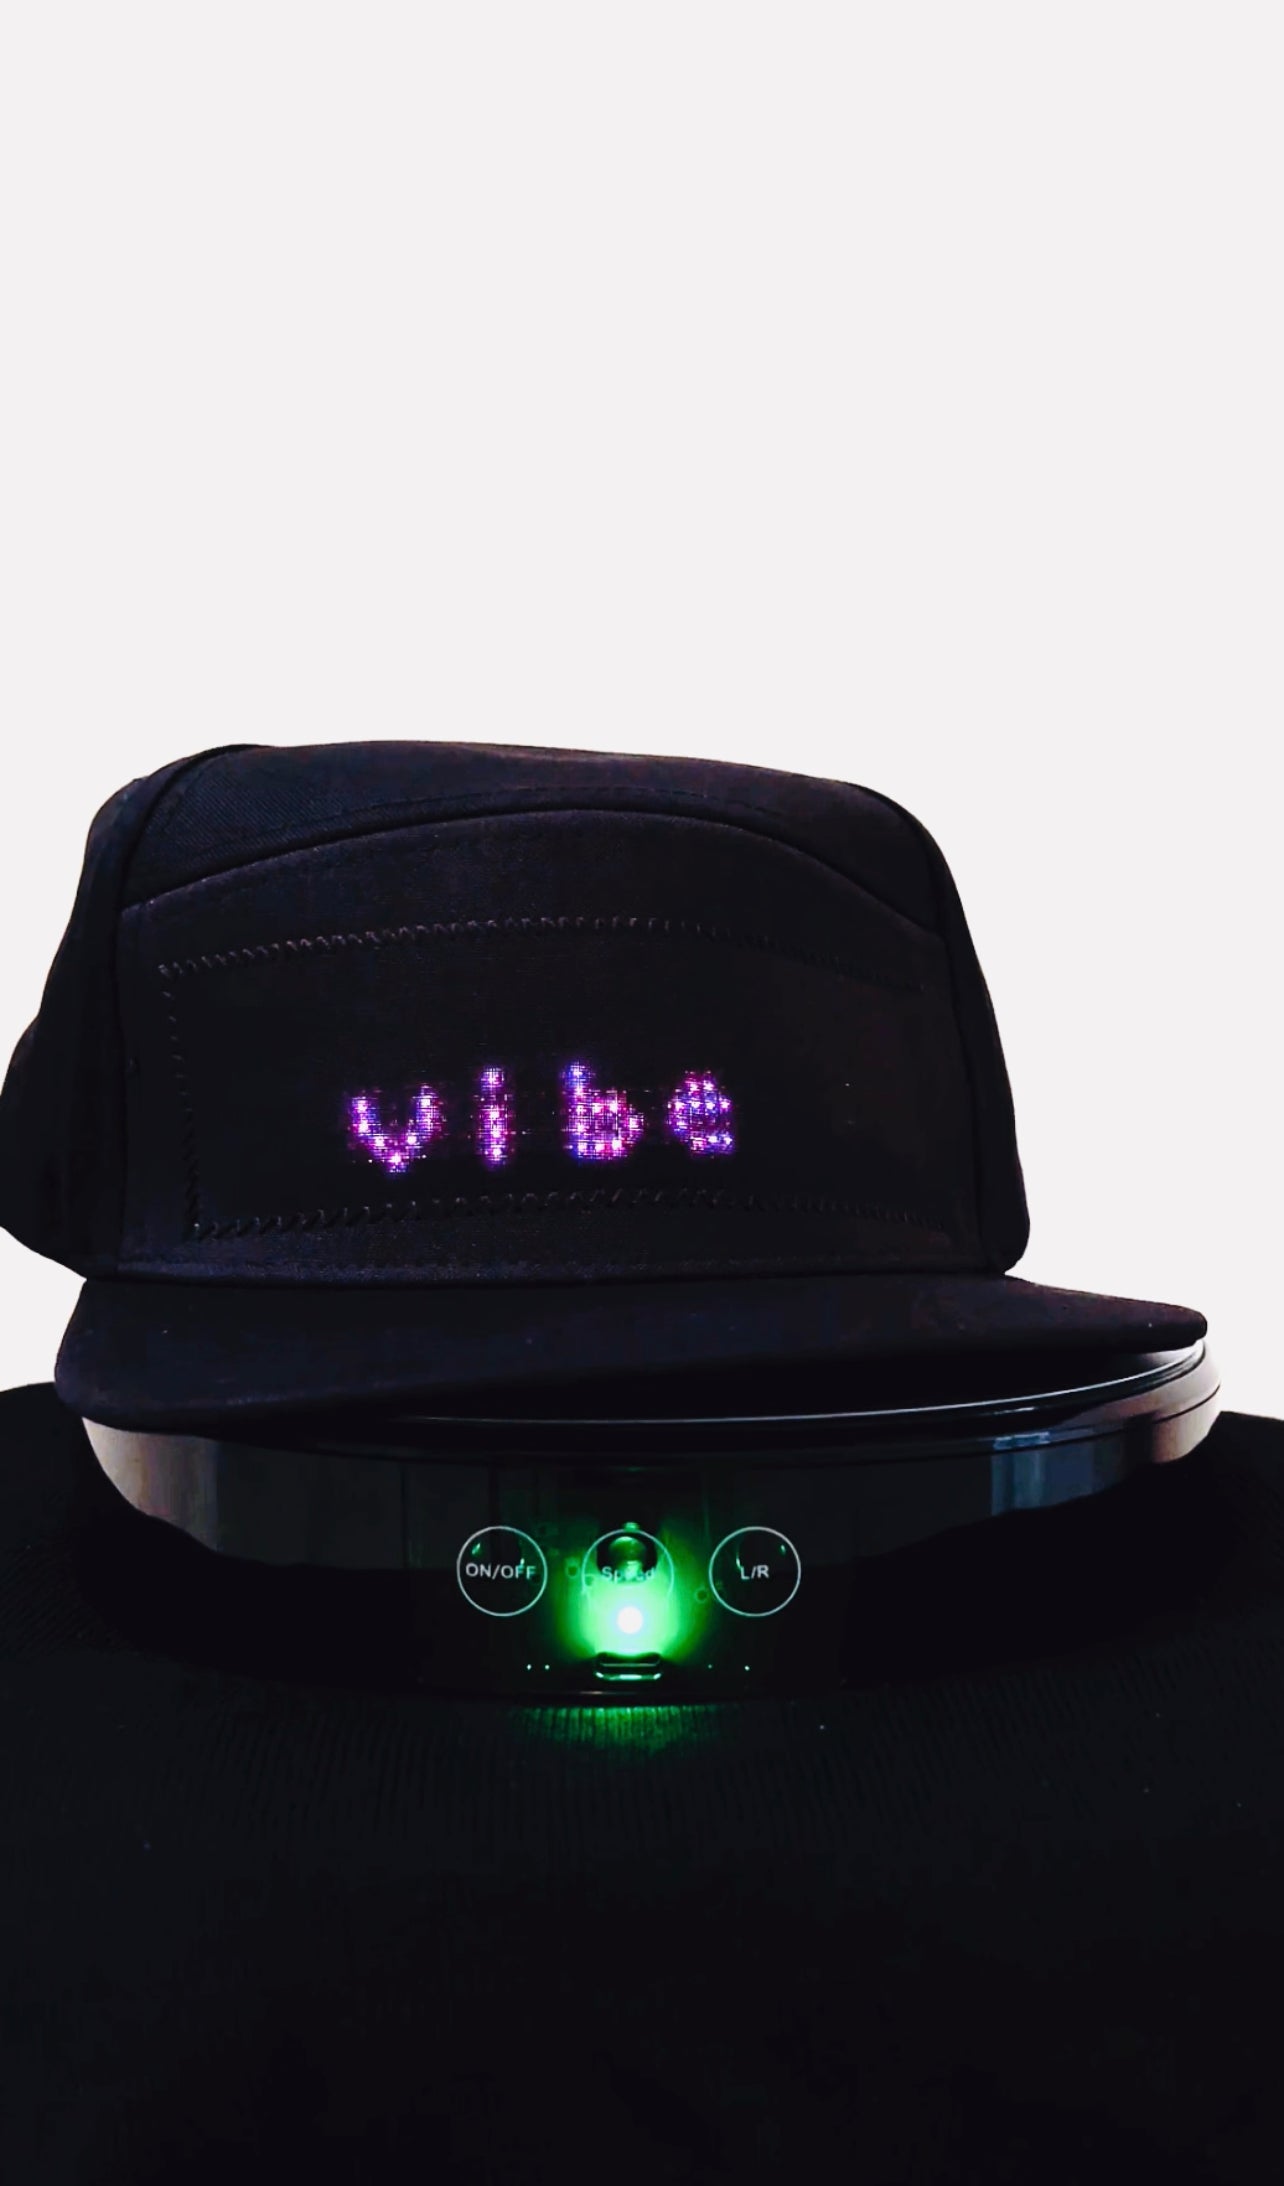 LED app controlled display hats – Astronomia Shoppe